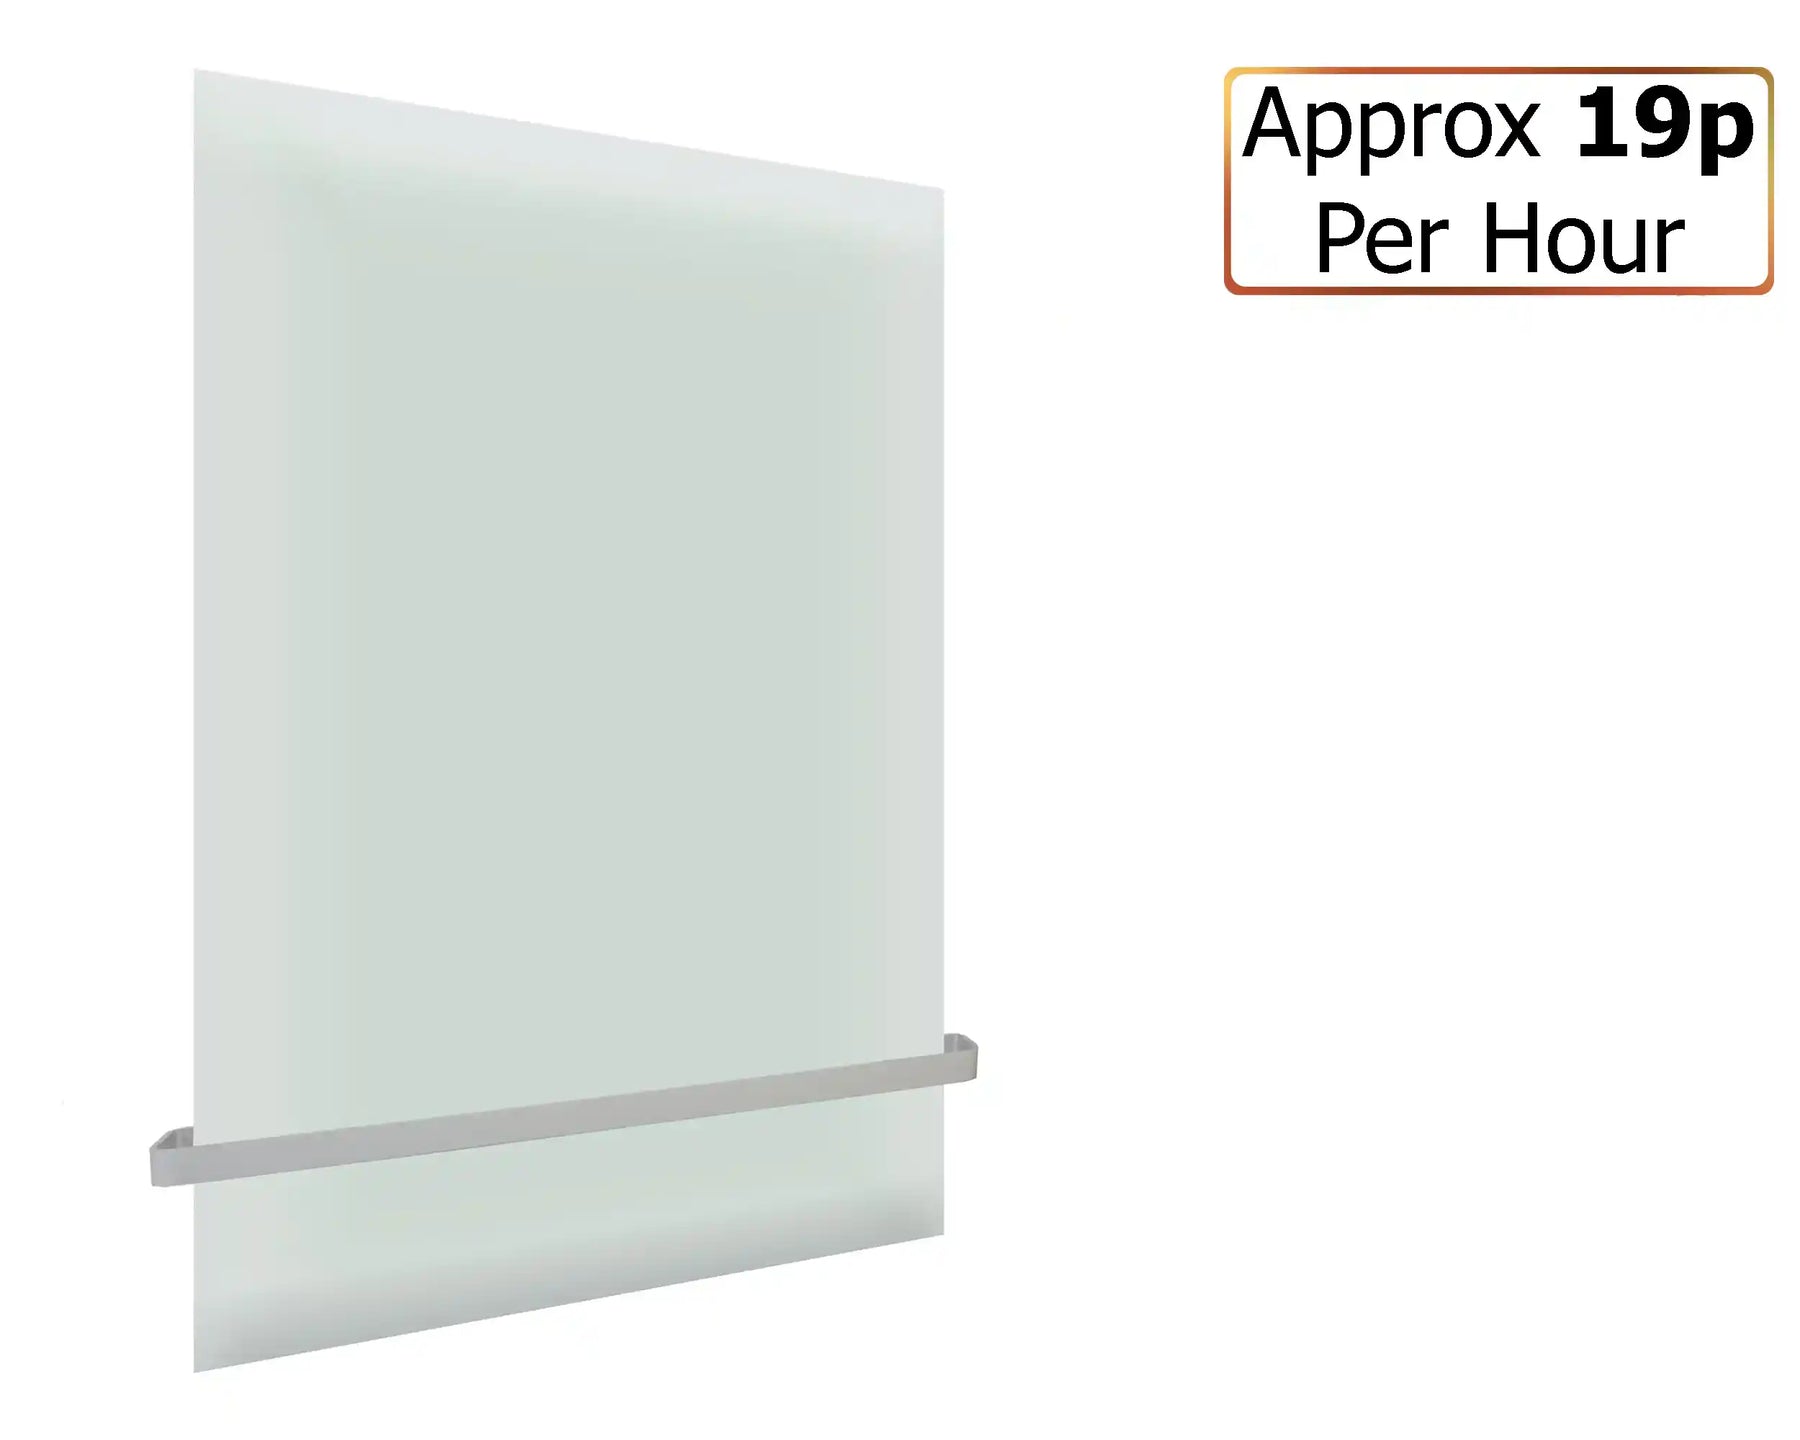 700W ESG Glass Infrared Heating Panel - Frost